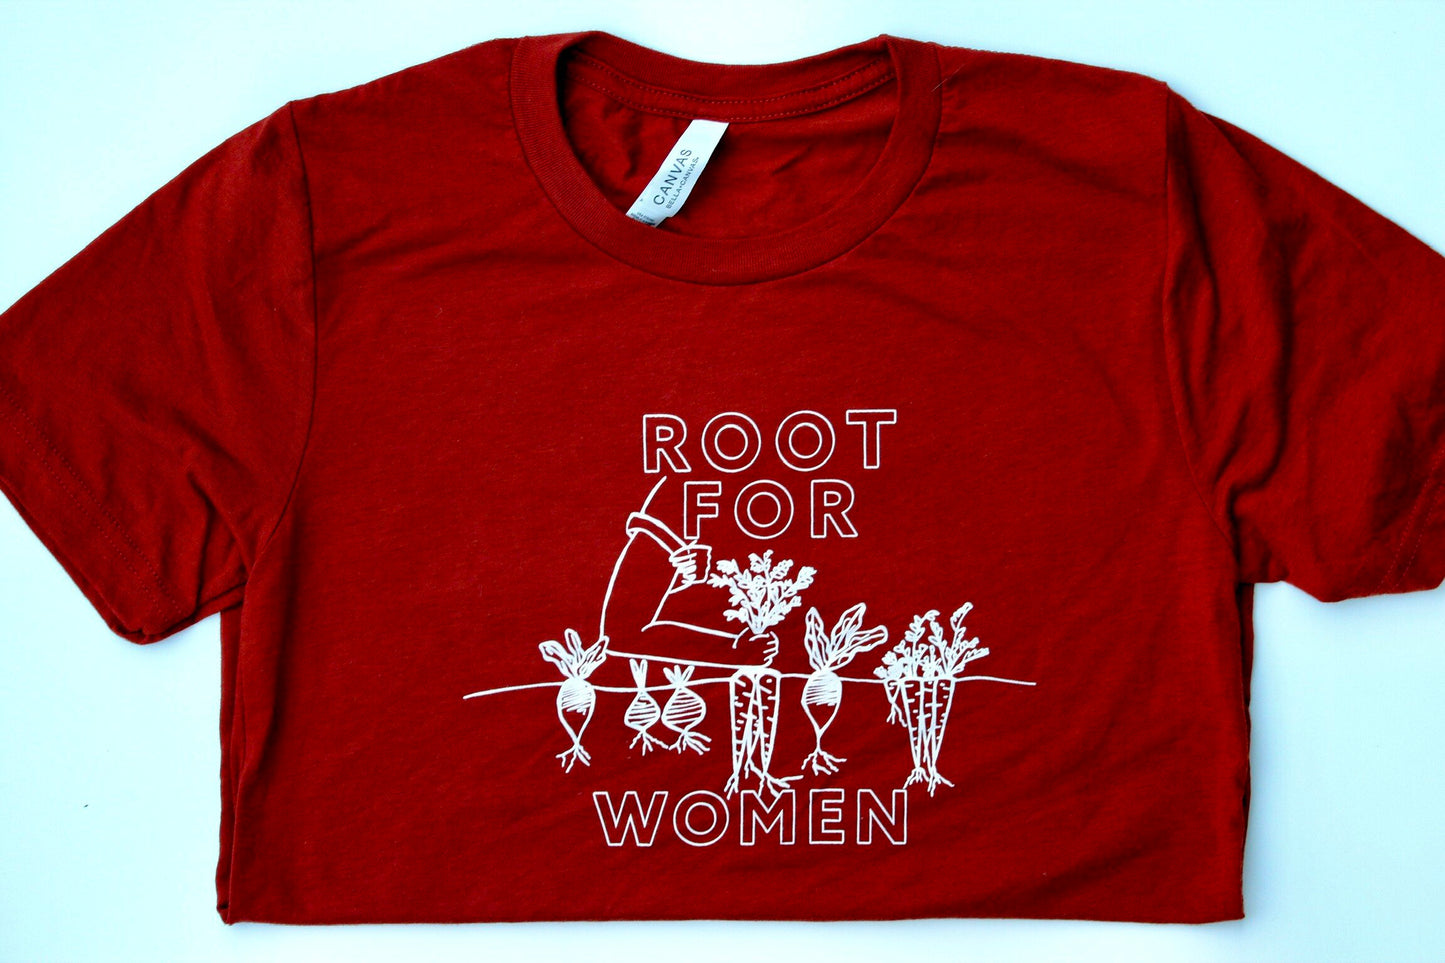 A folded red tee that reads "Root for Women" in block letters with a garden illustration 